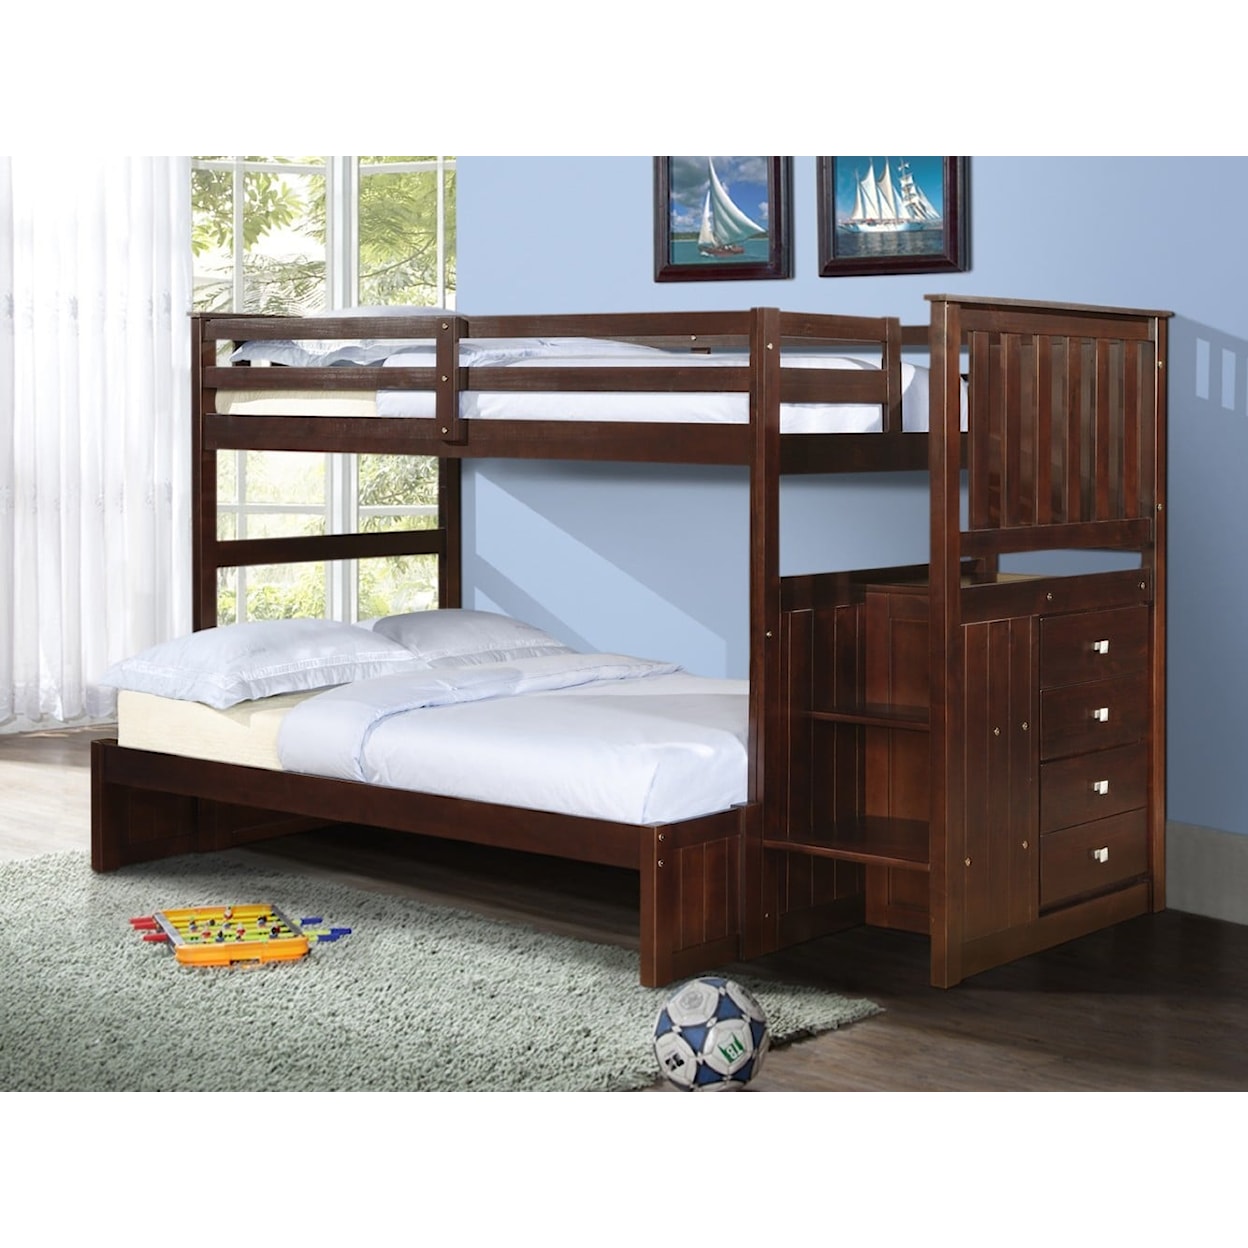 Donco Trading Co Bunkbeds ARCHIE CAPPUCCINO TWIN/FULL | STAIRWAY BUNKB